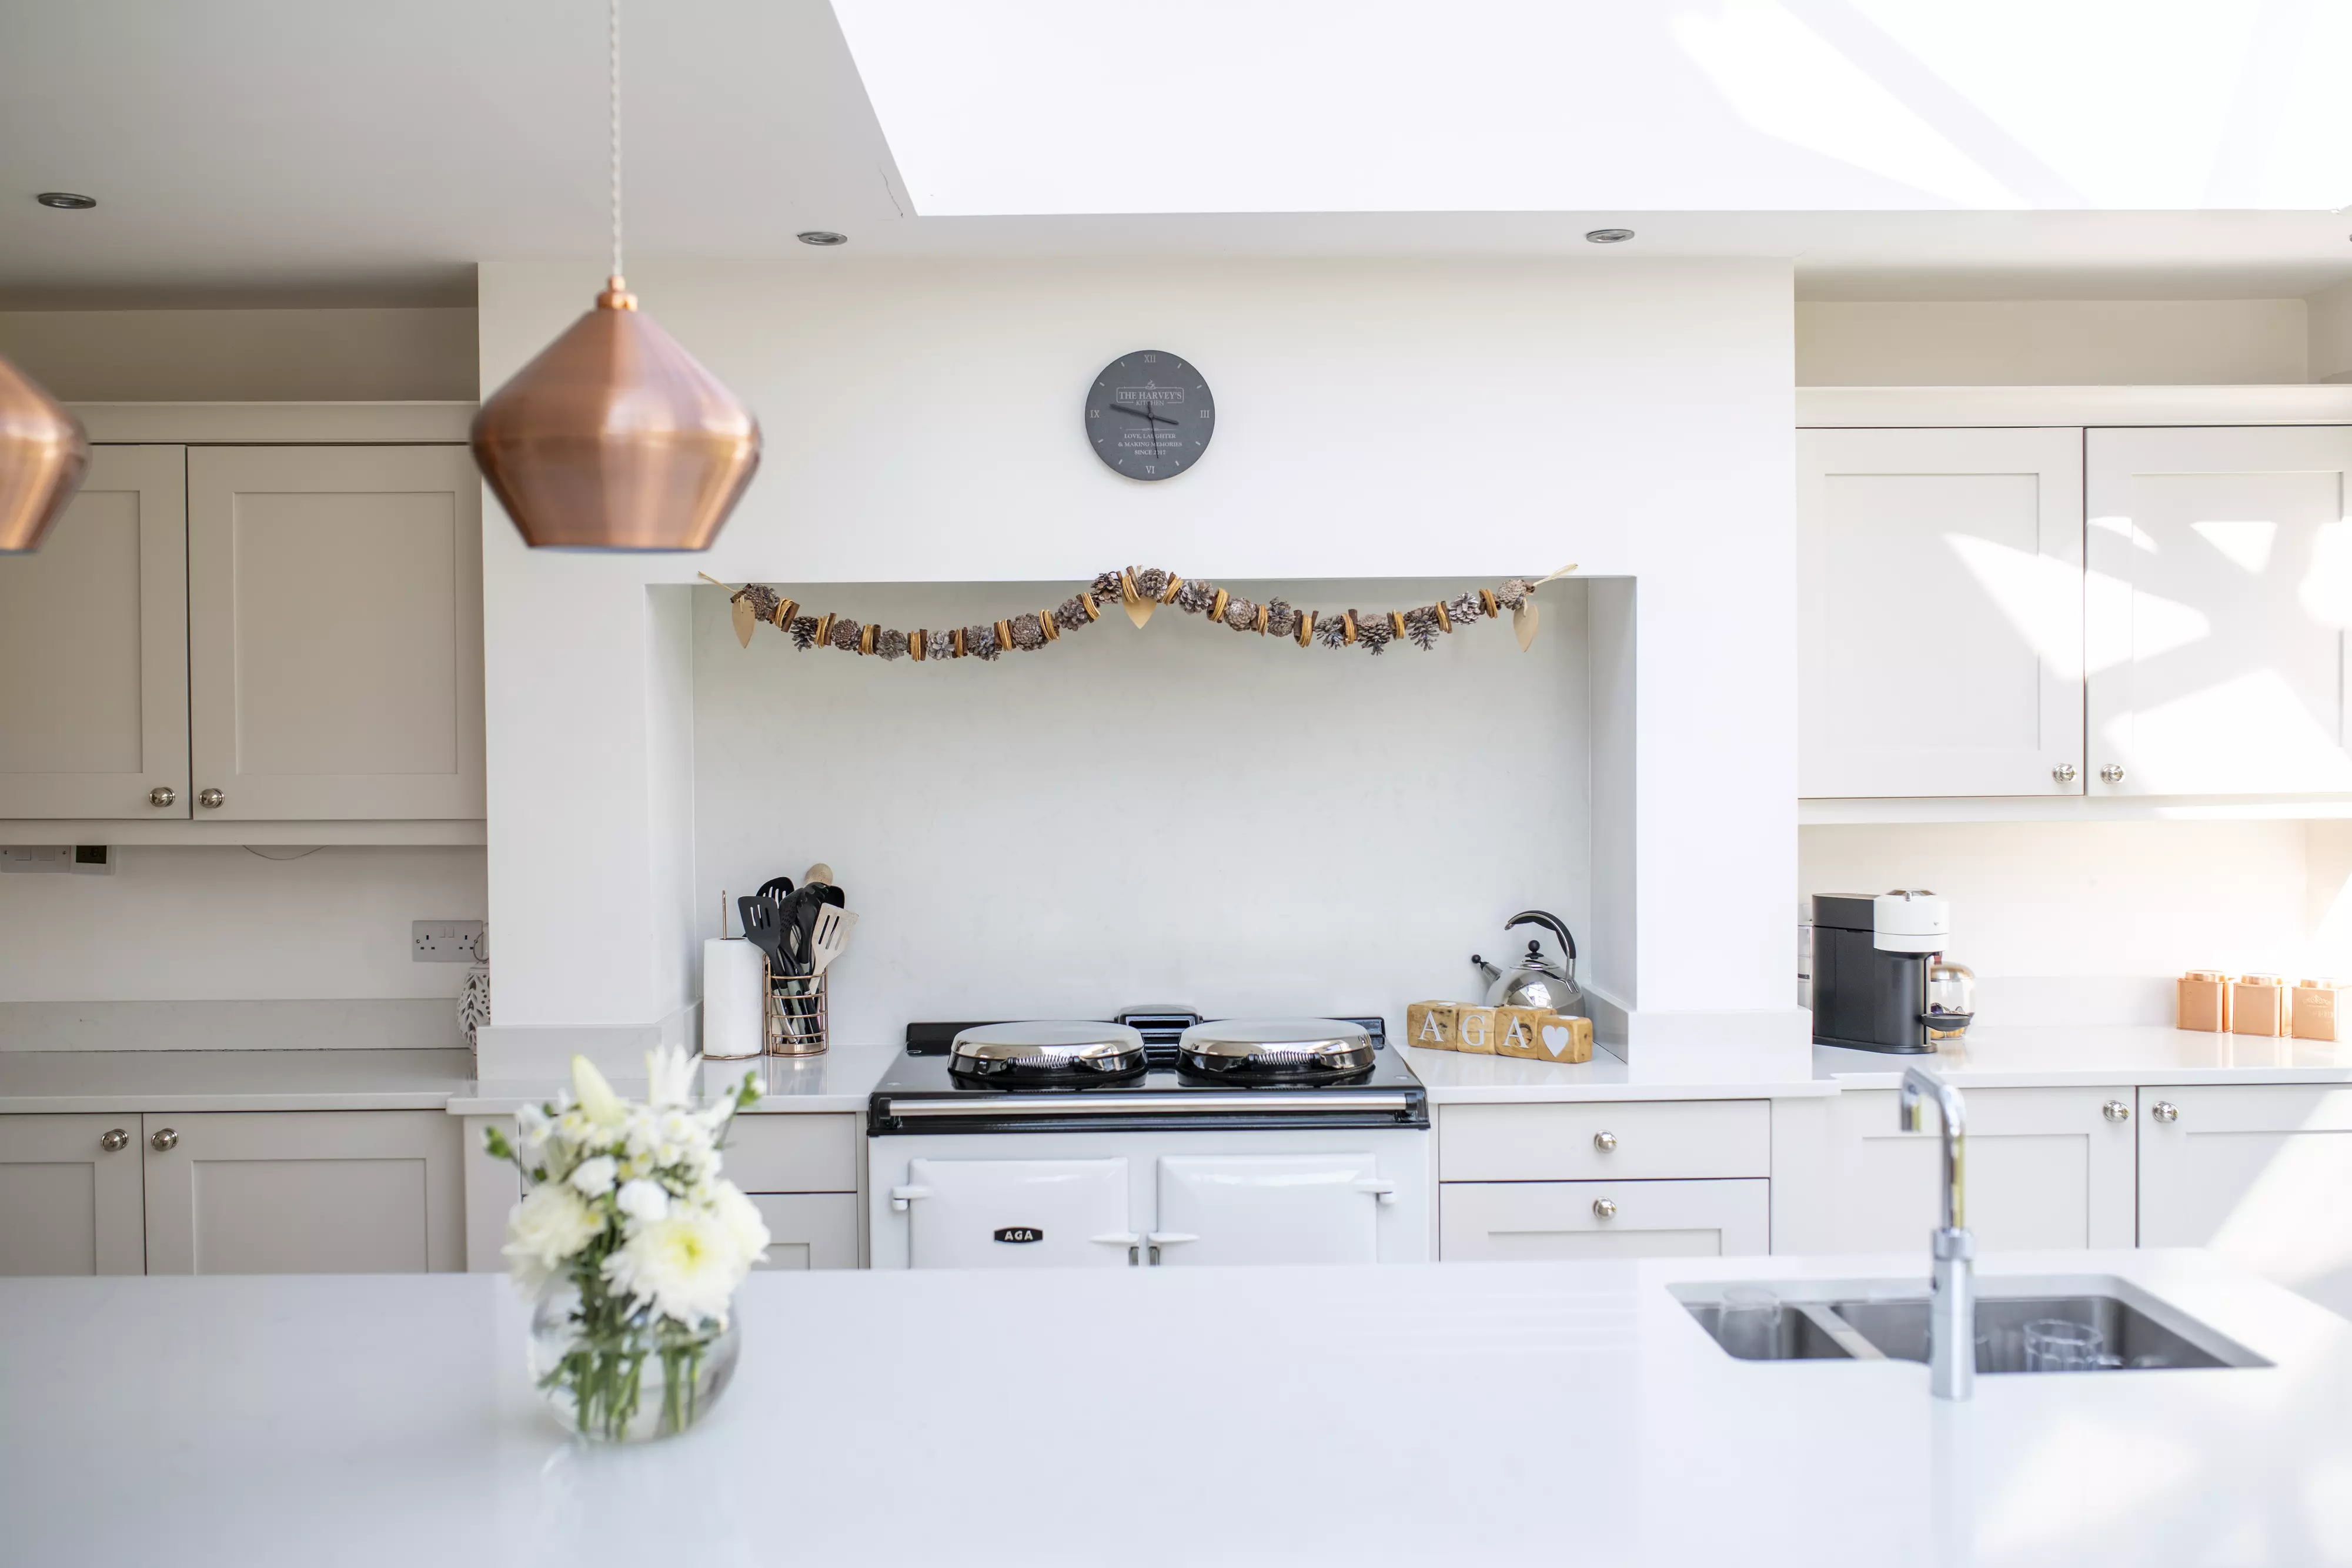 Spacious modern kitchen with white cupboards, VELUX skylight, and copper lights.